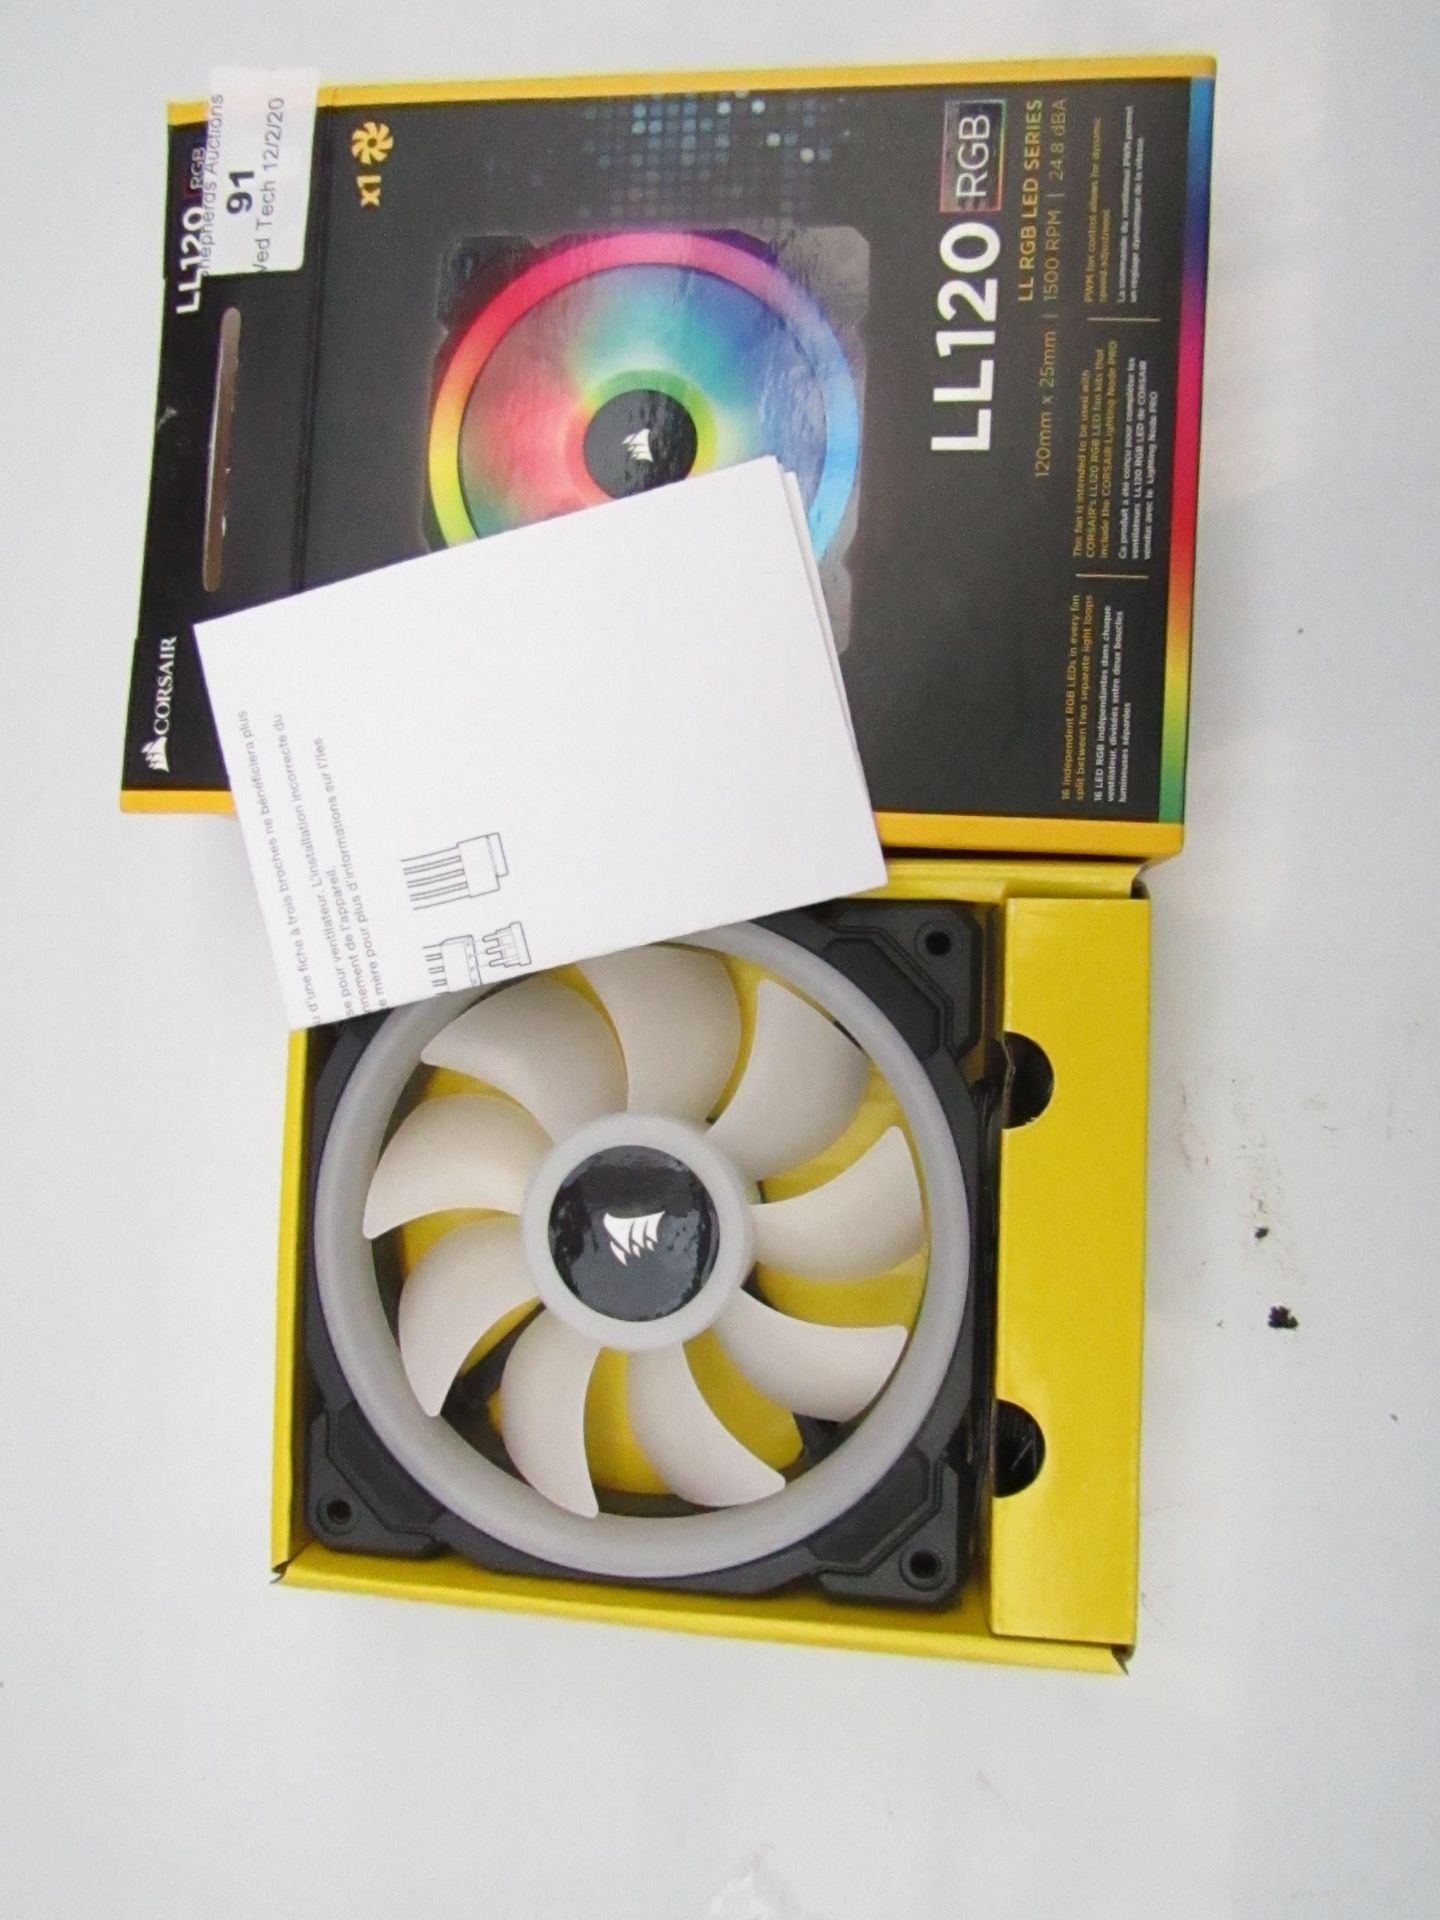 CORSAIR - LL120 RGB - Fan - Untested and boxed.